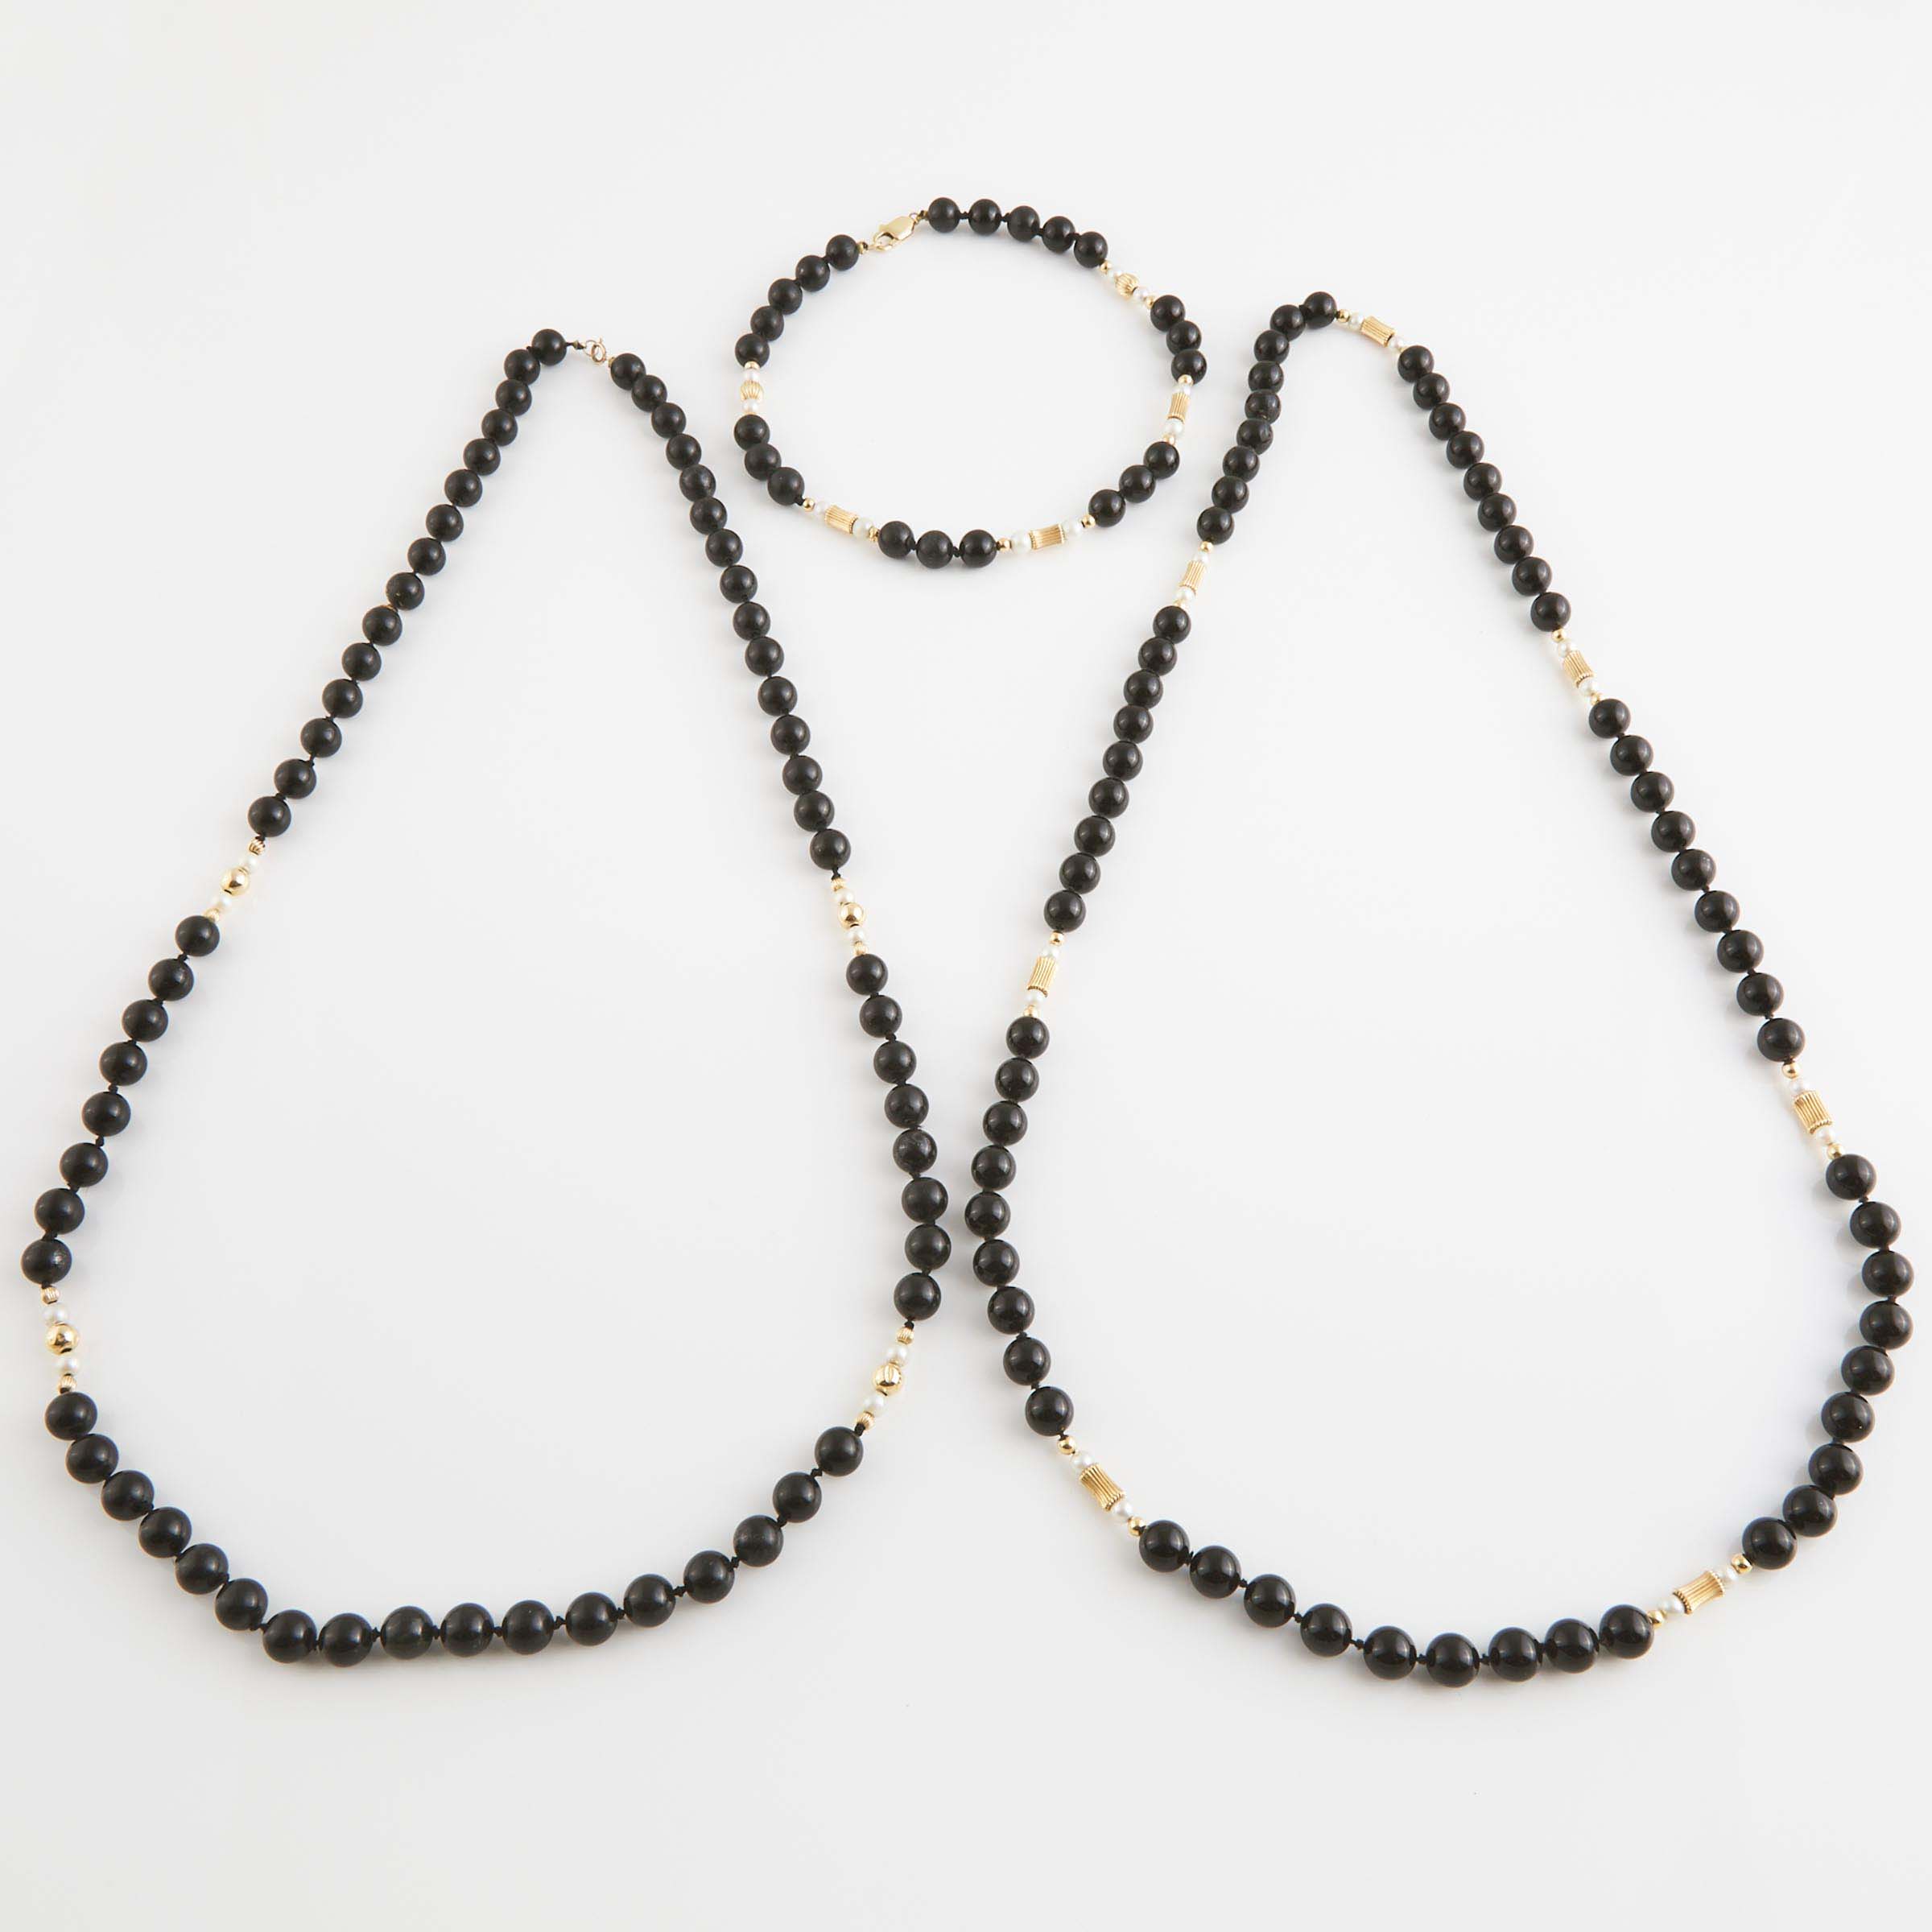 3 Single Strands Of Onyx Beads And Pearls